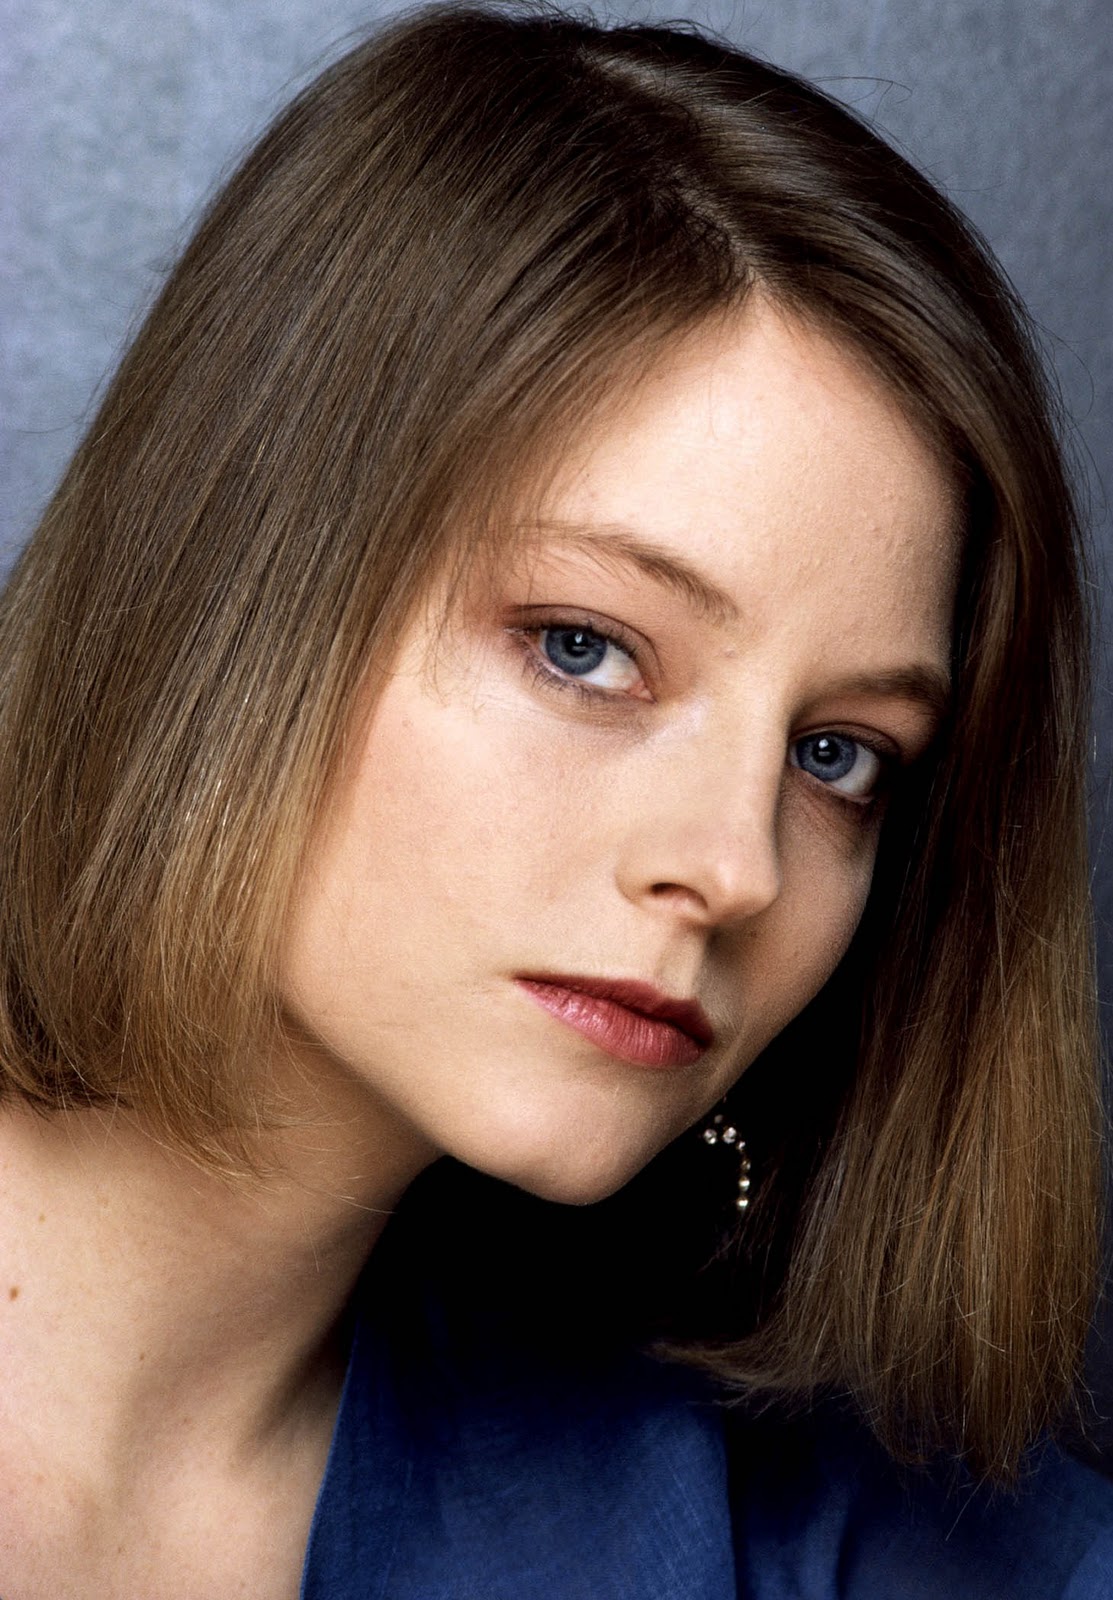 Jodie Foster In Her 20s 15 Best Jodie Foster Movies Of All Time This Role For Which She